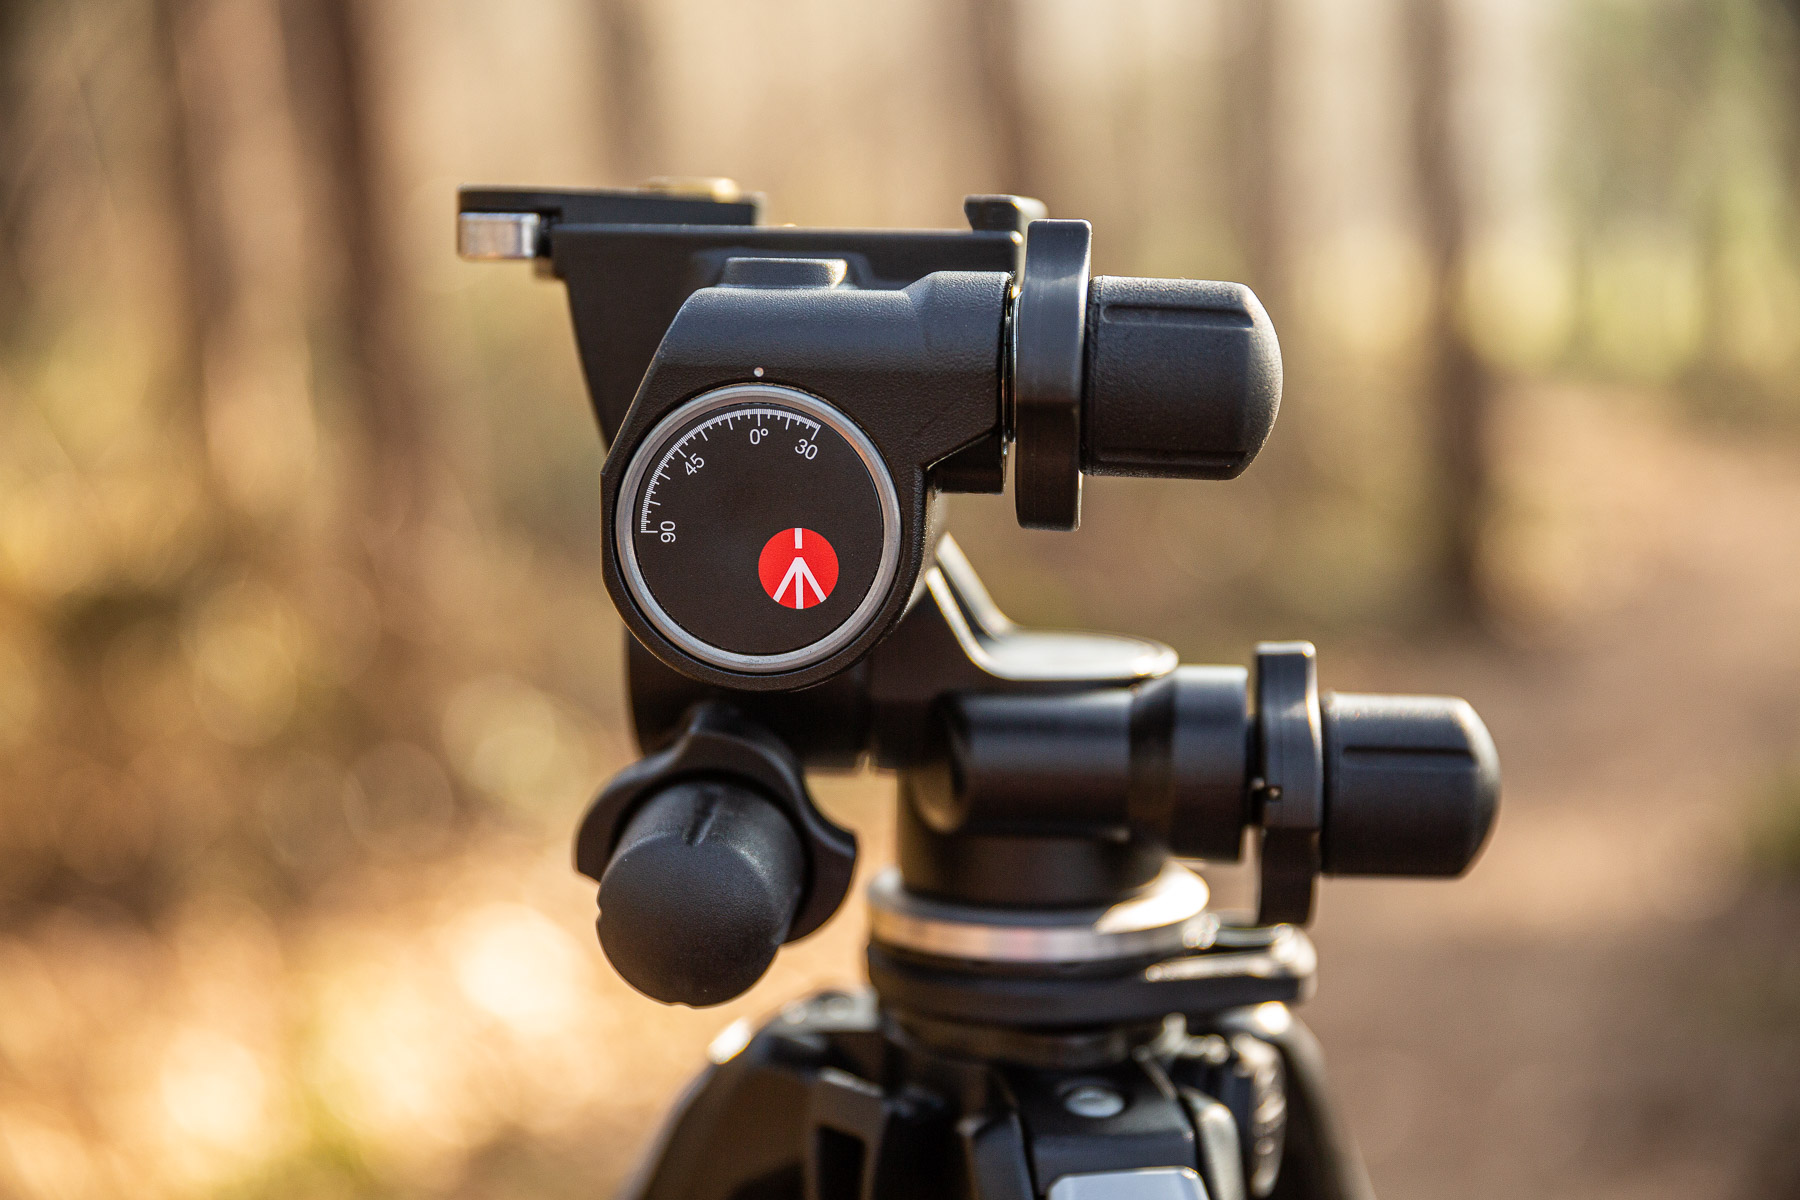 Manfrotto 410 vs Manfrotto MHXPRO-3WG, Manfrotto 410 Junior Geared Head, manfrotto vergelijking, Manfrotto Geared Head comparison, Manfrotto Geared Head